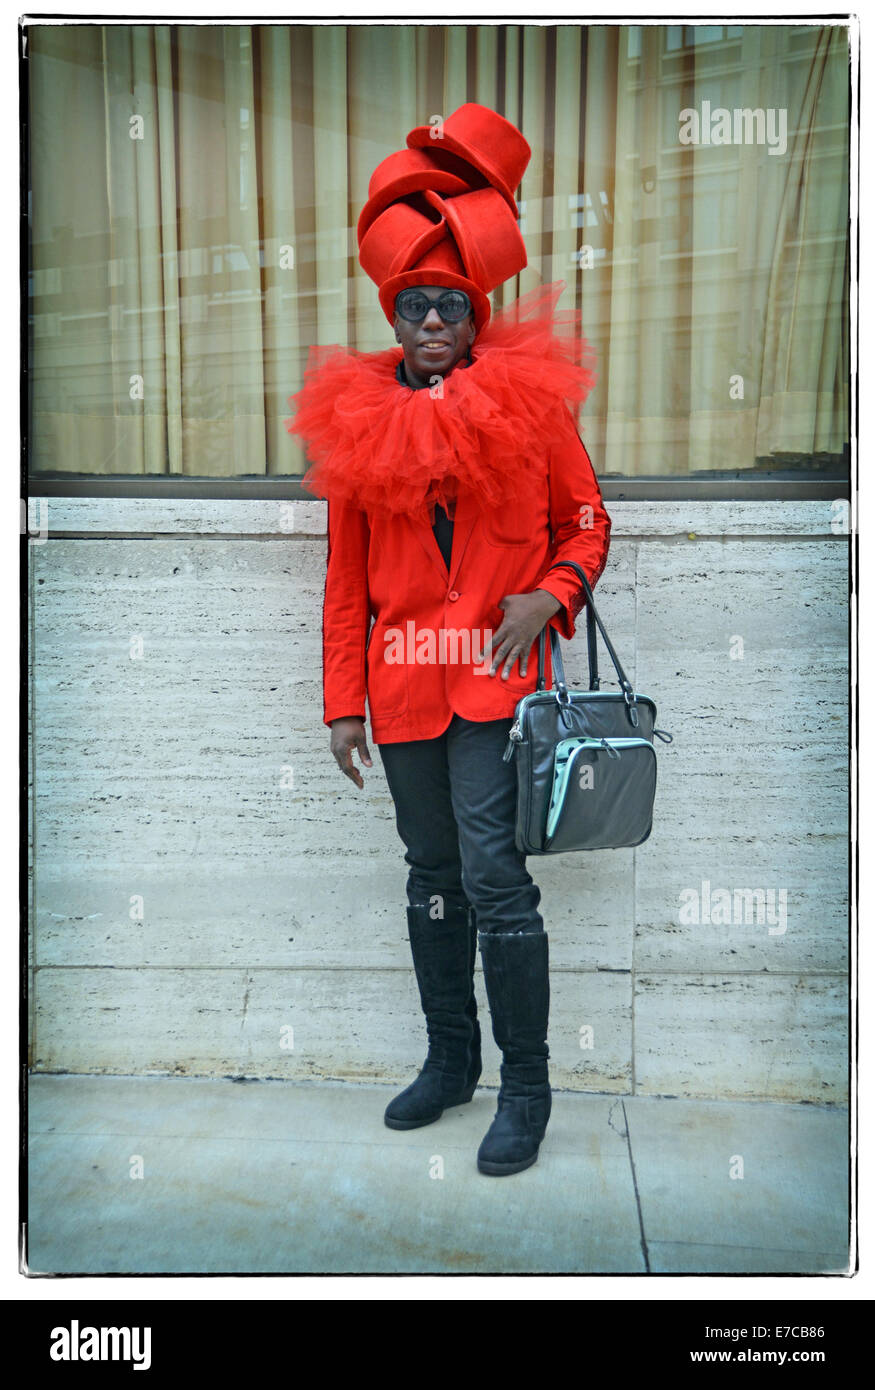 Portrait of performance artist Lee Souljah at Fashion Week 2014 in New York City. Stock Photo